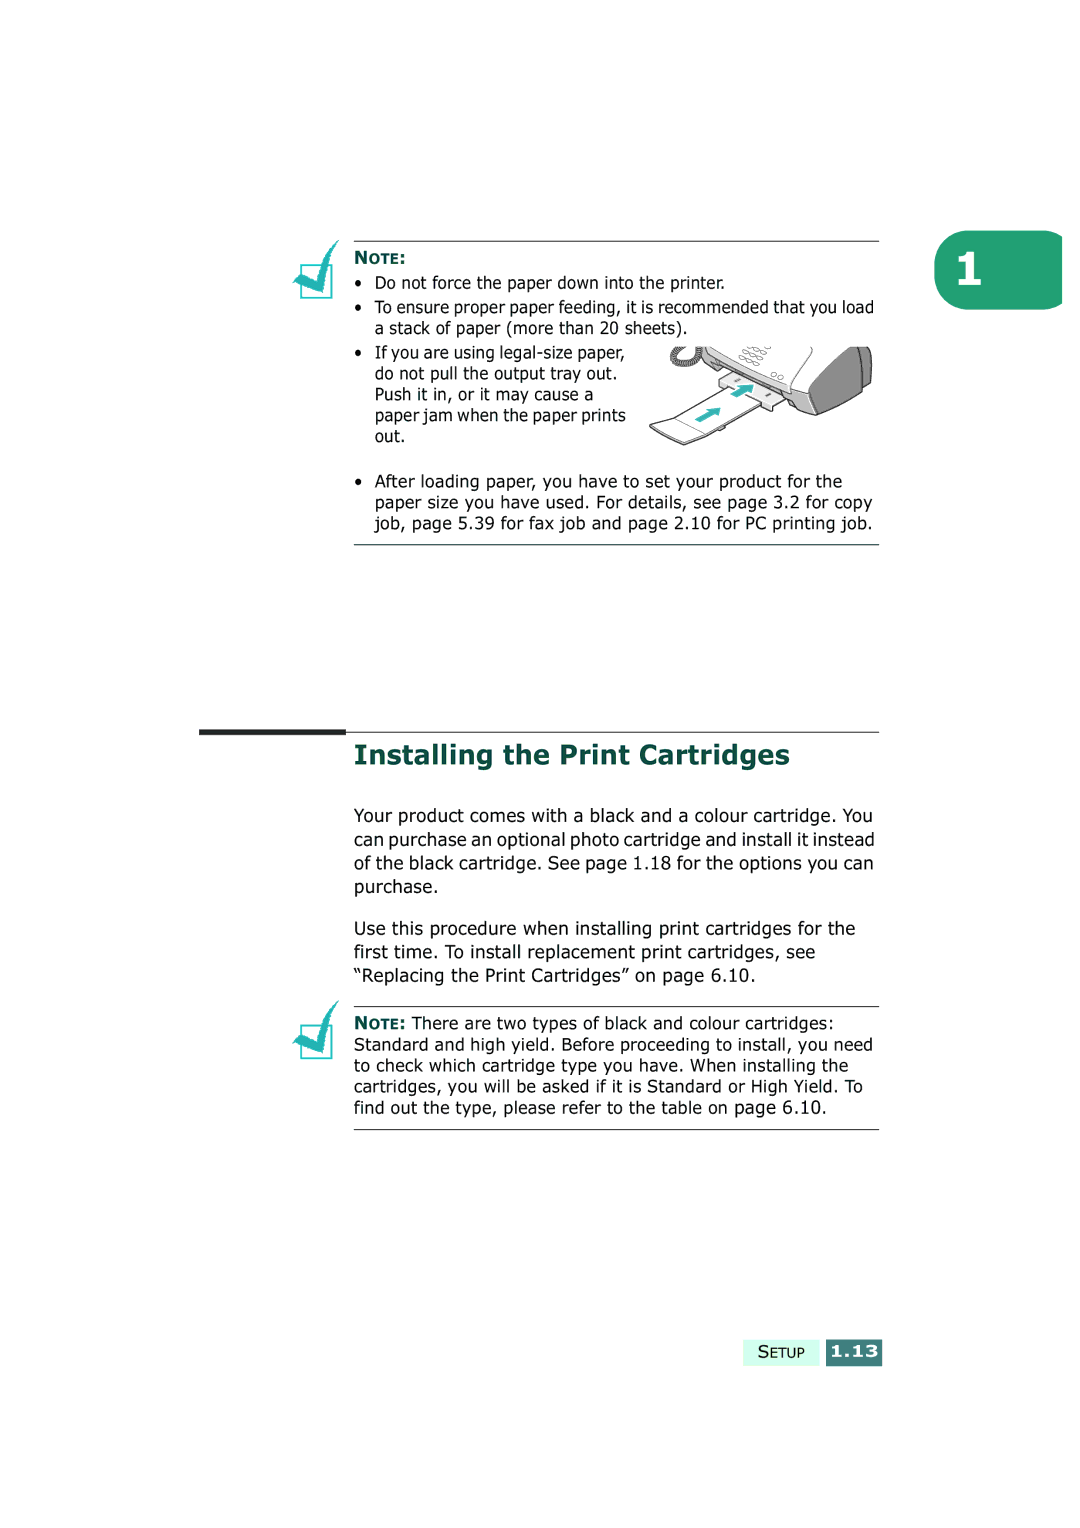 Samsung SF-430 manual Installing the Print Cartridges, Do not force the paper down into the printer 